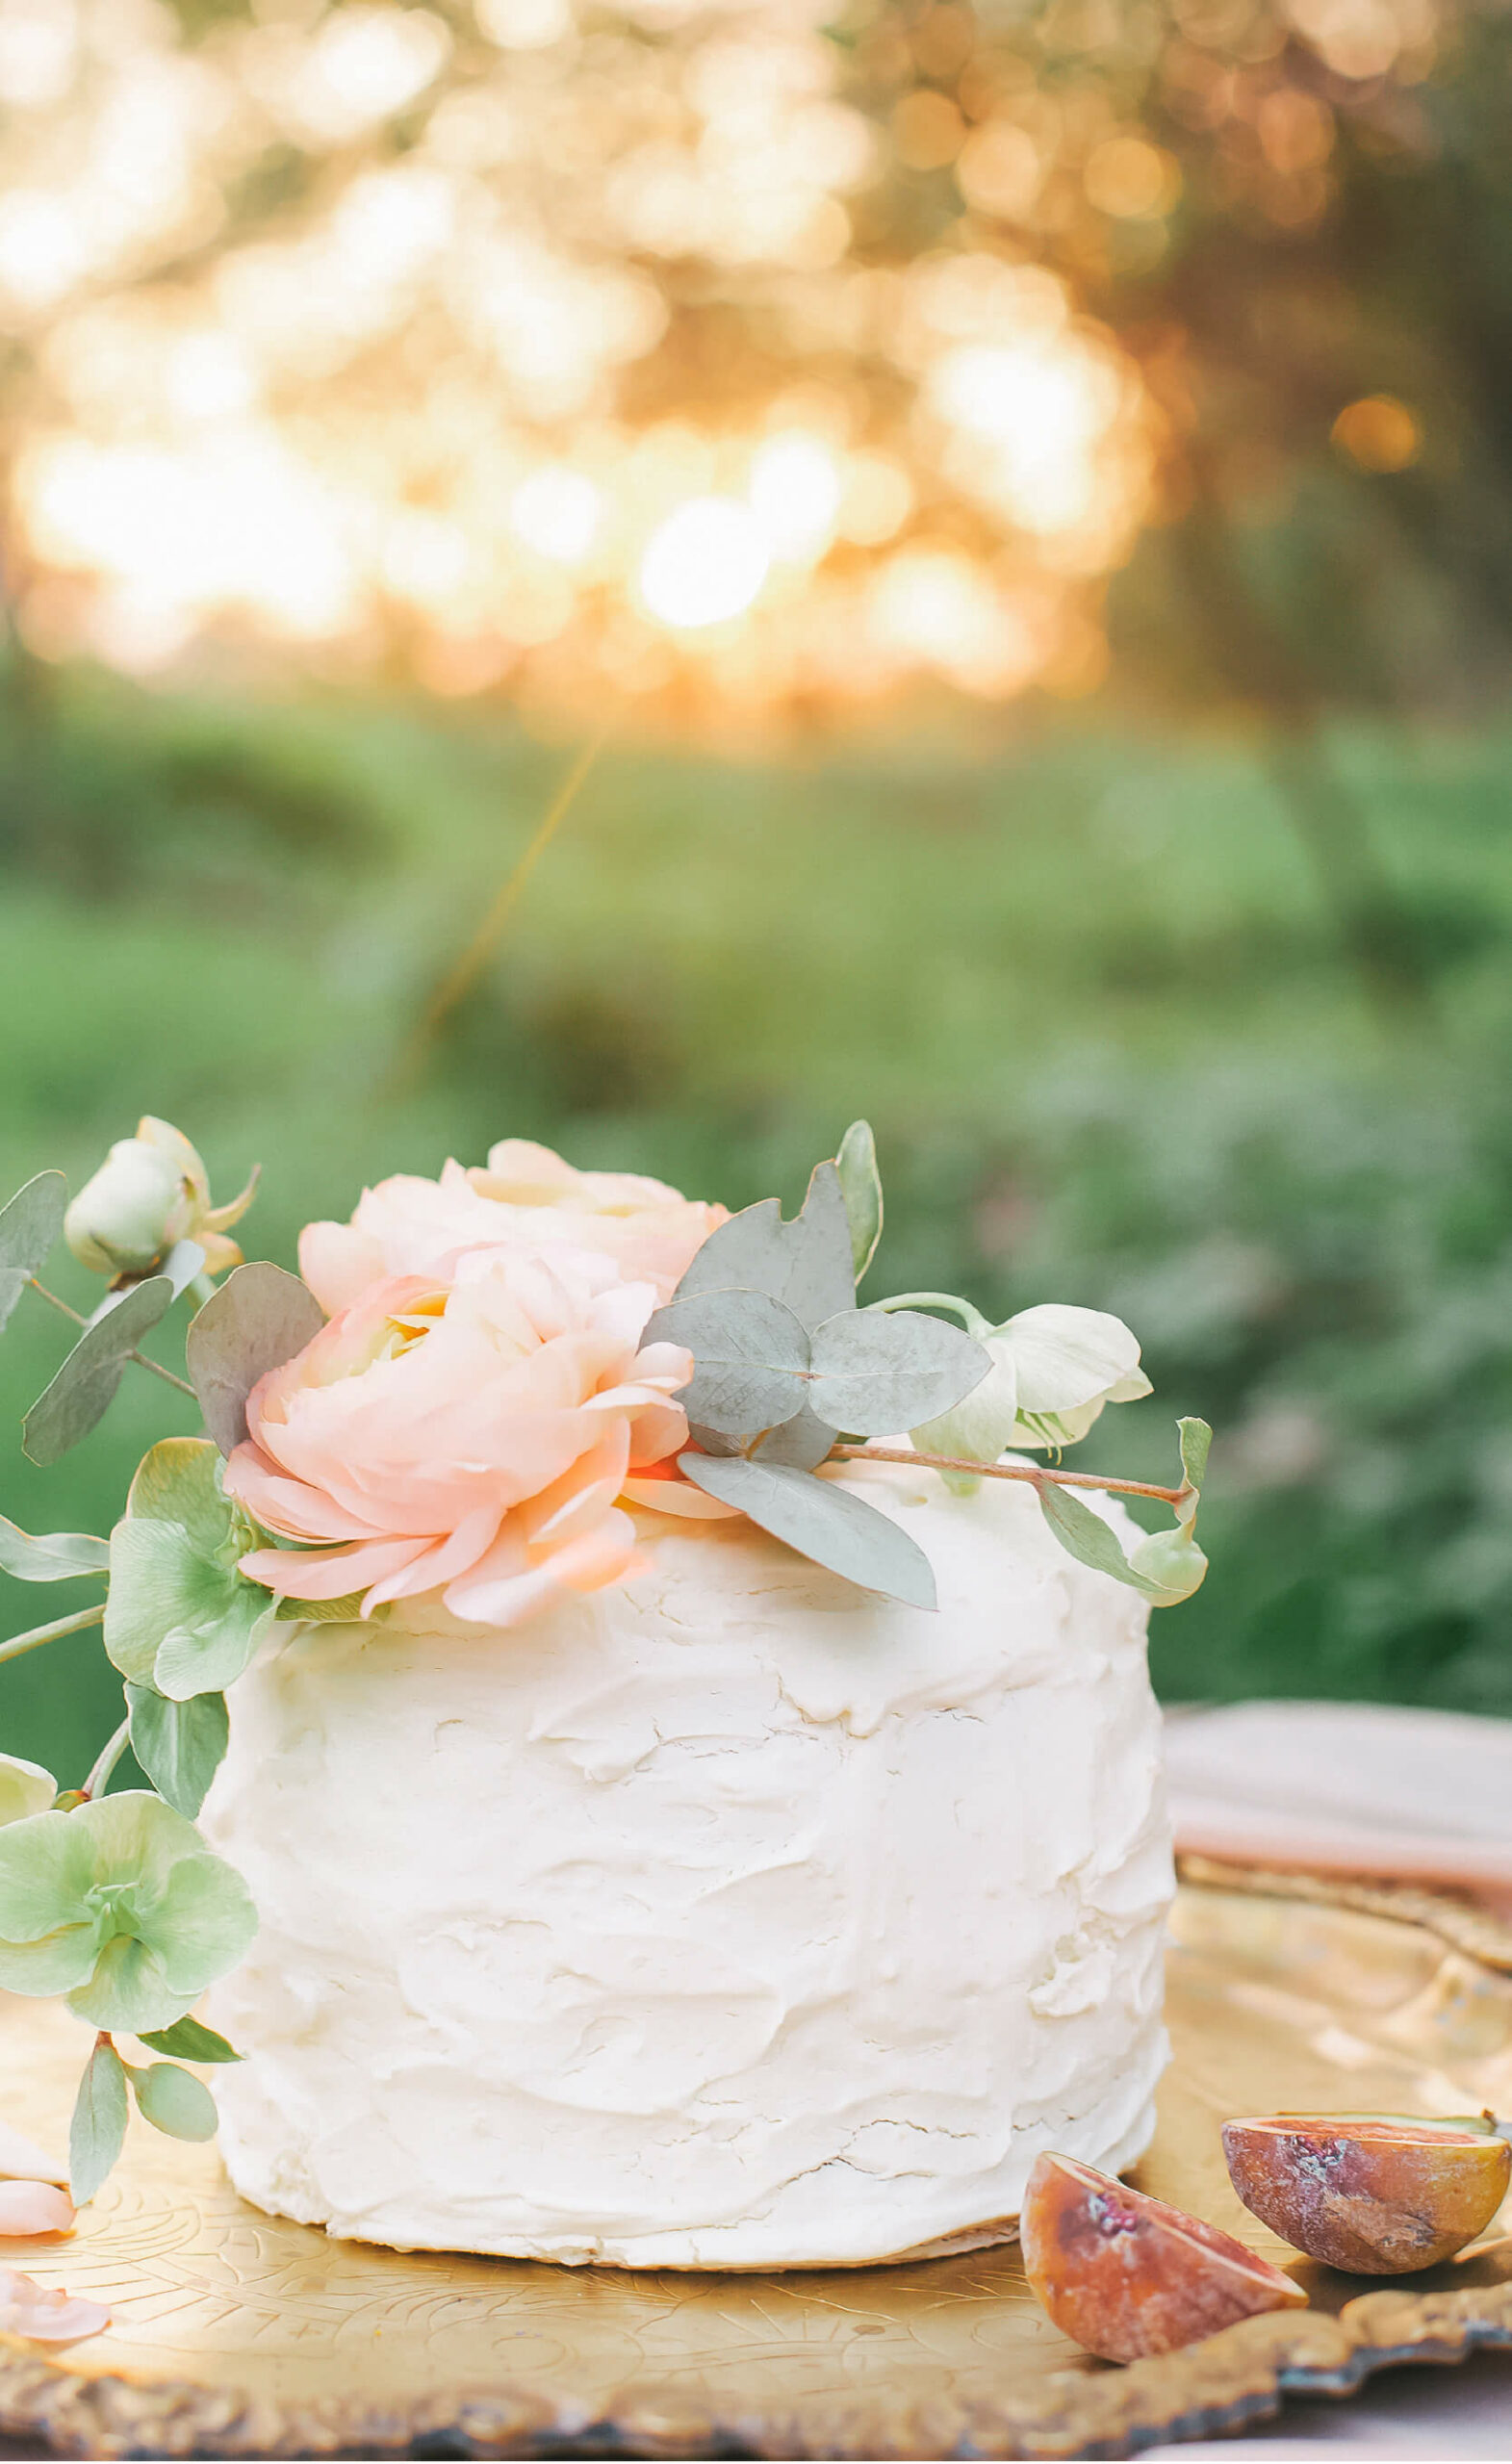 image of a wedding cake with a flower on top